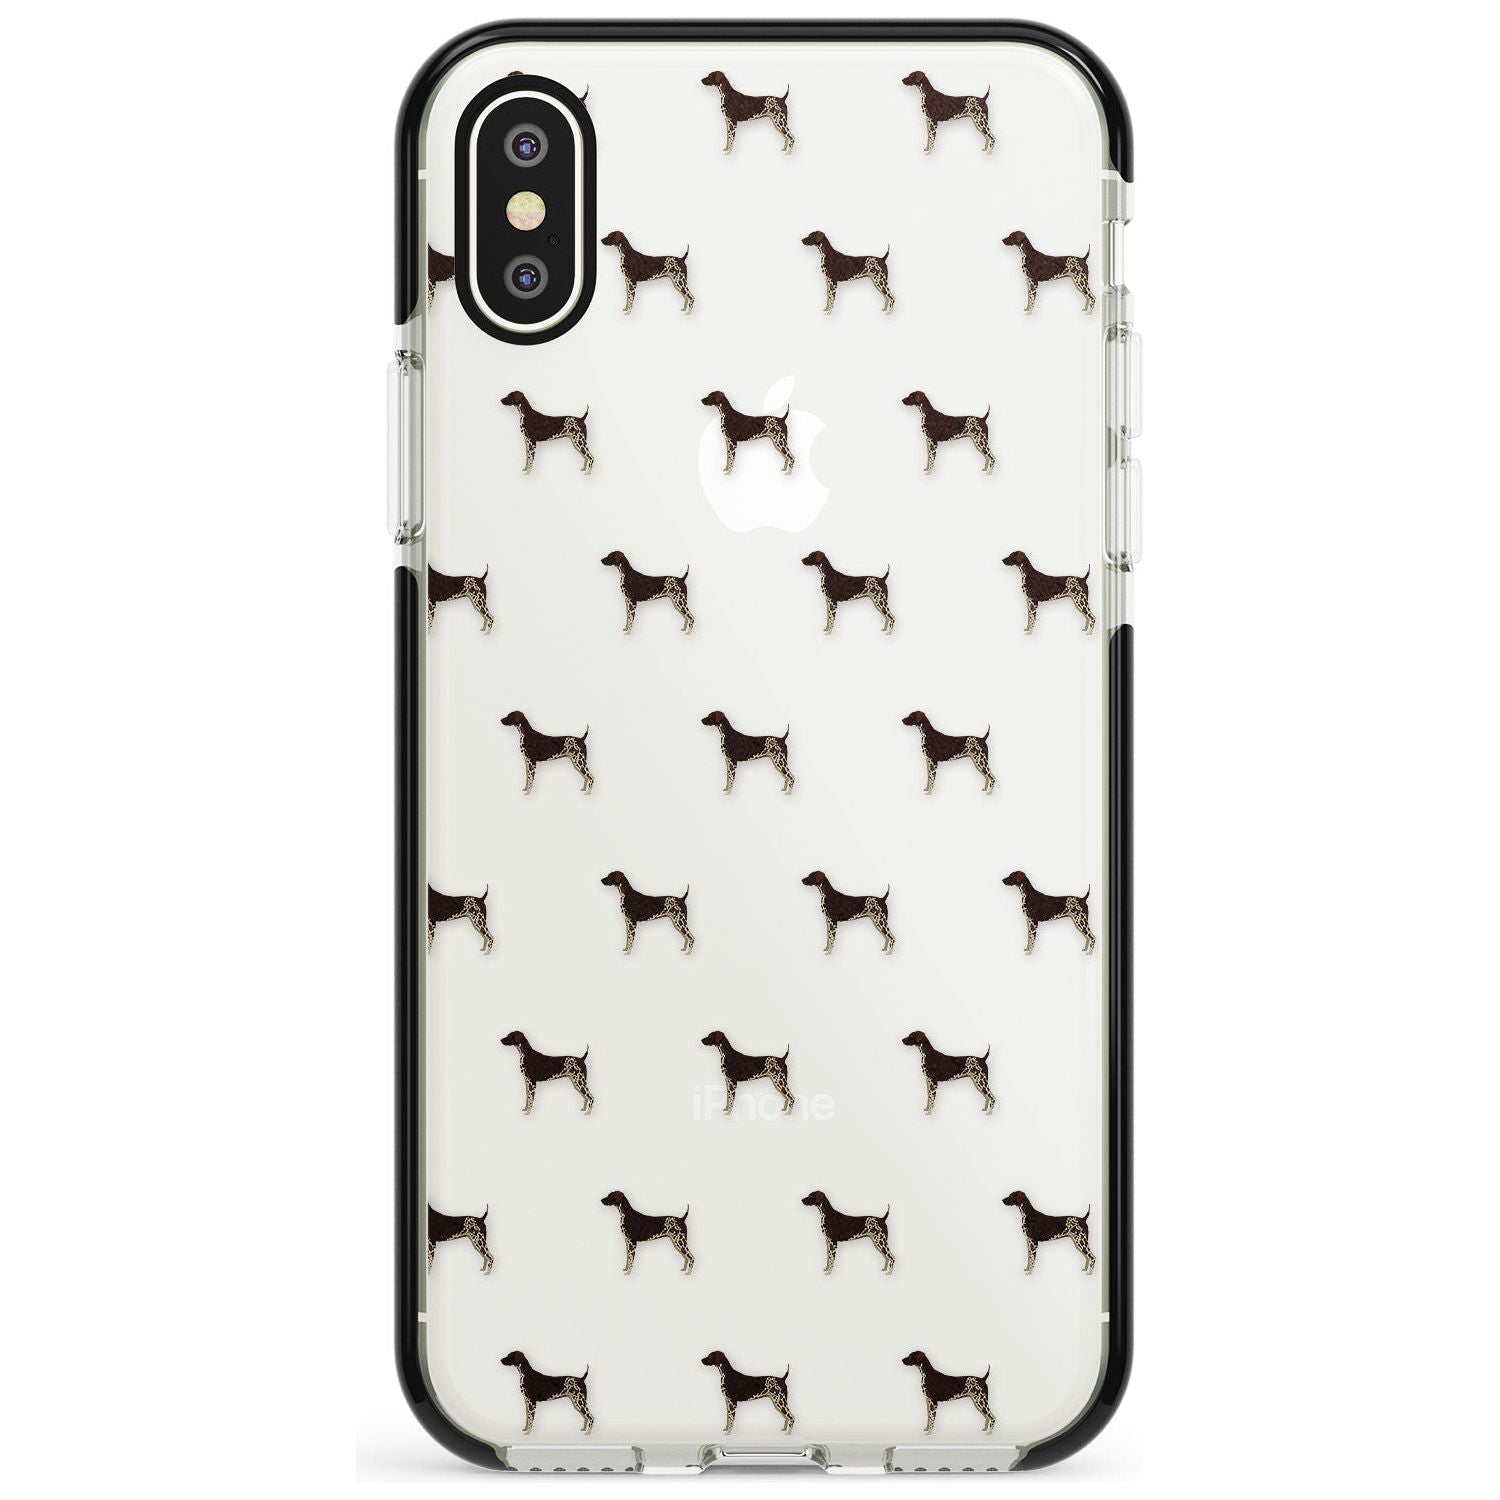 German Shorthaired Pointer Dog Pattern Clear Black Impact Phone Case for iPhone X XS Max XR